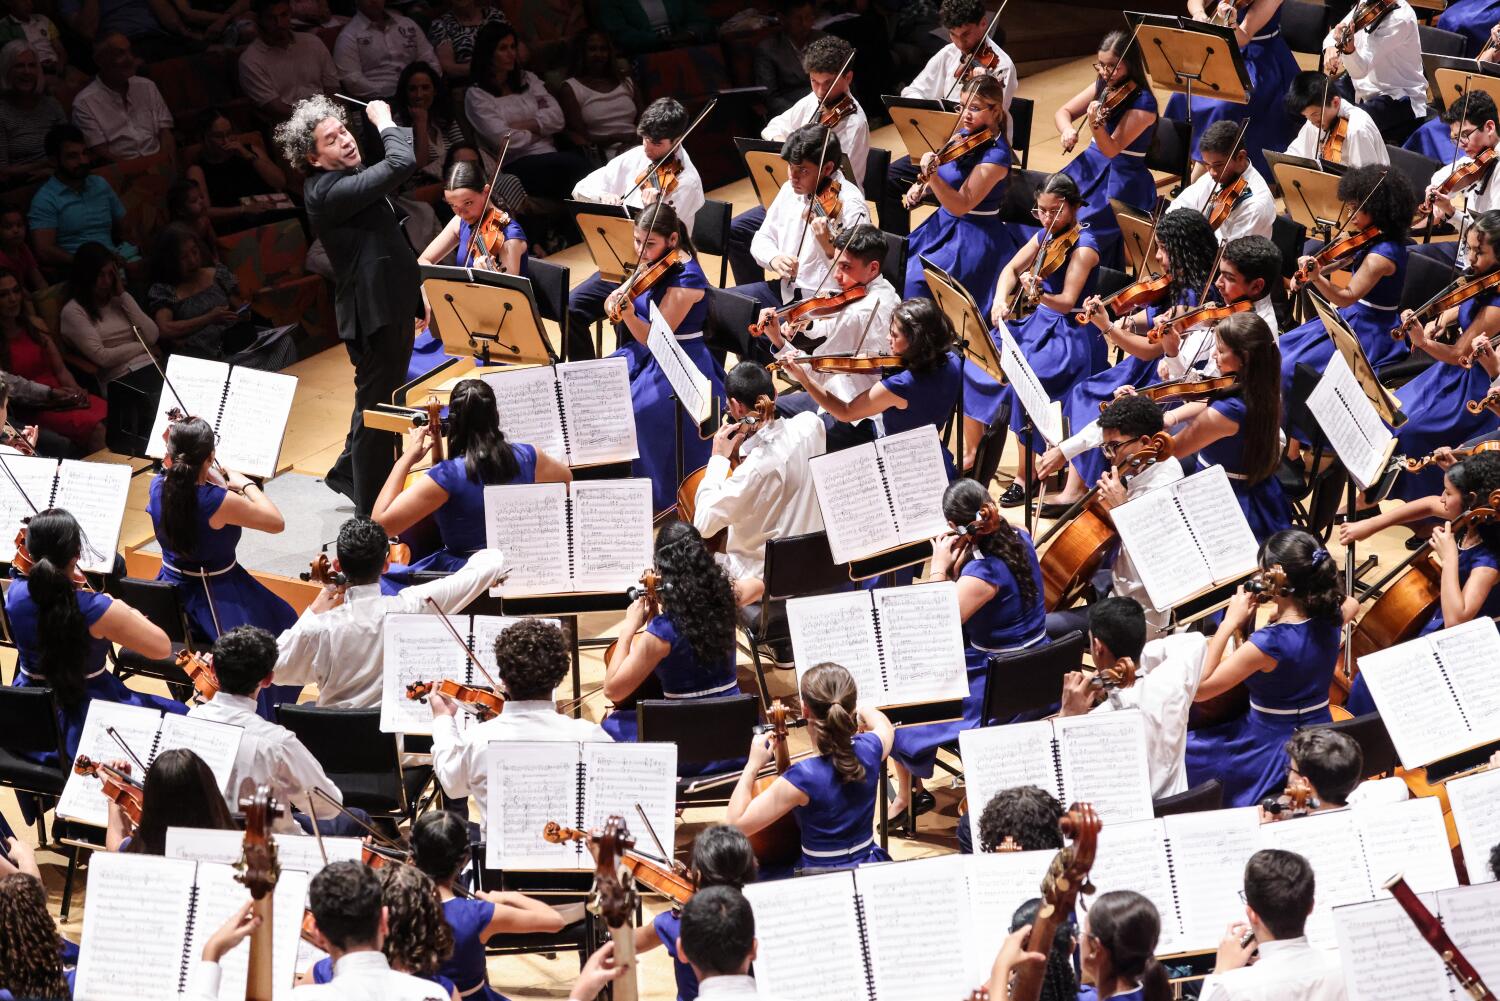 Commentary: In a divided Venezuela, National Children's Symphony, with Dudamel's help, shows how to get along